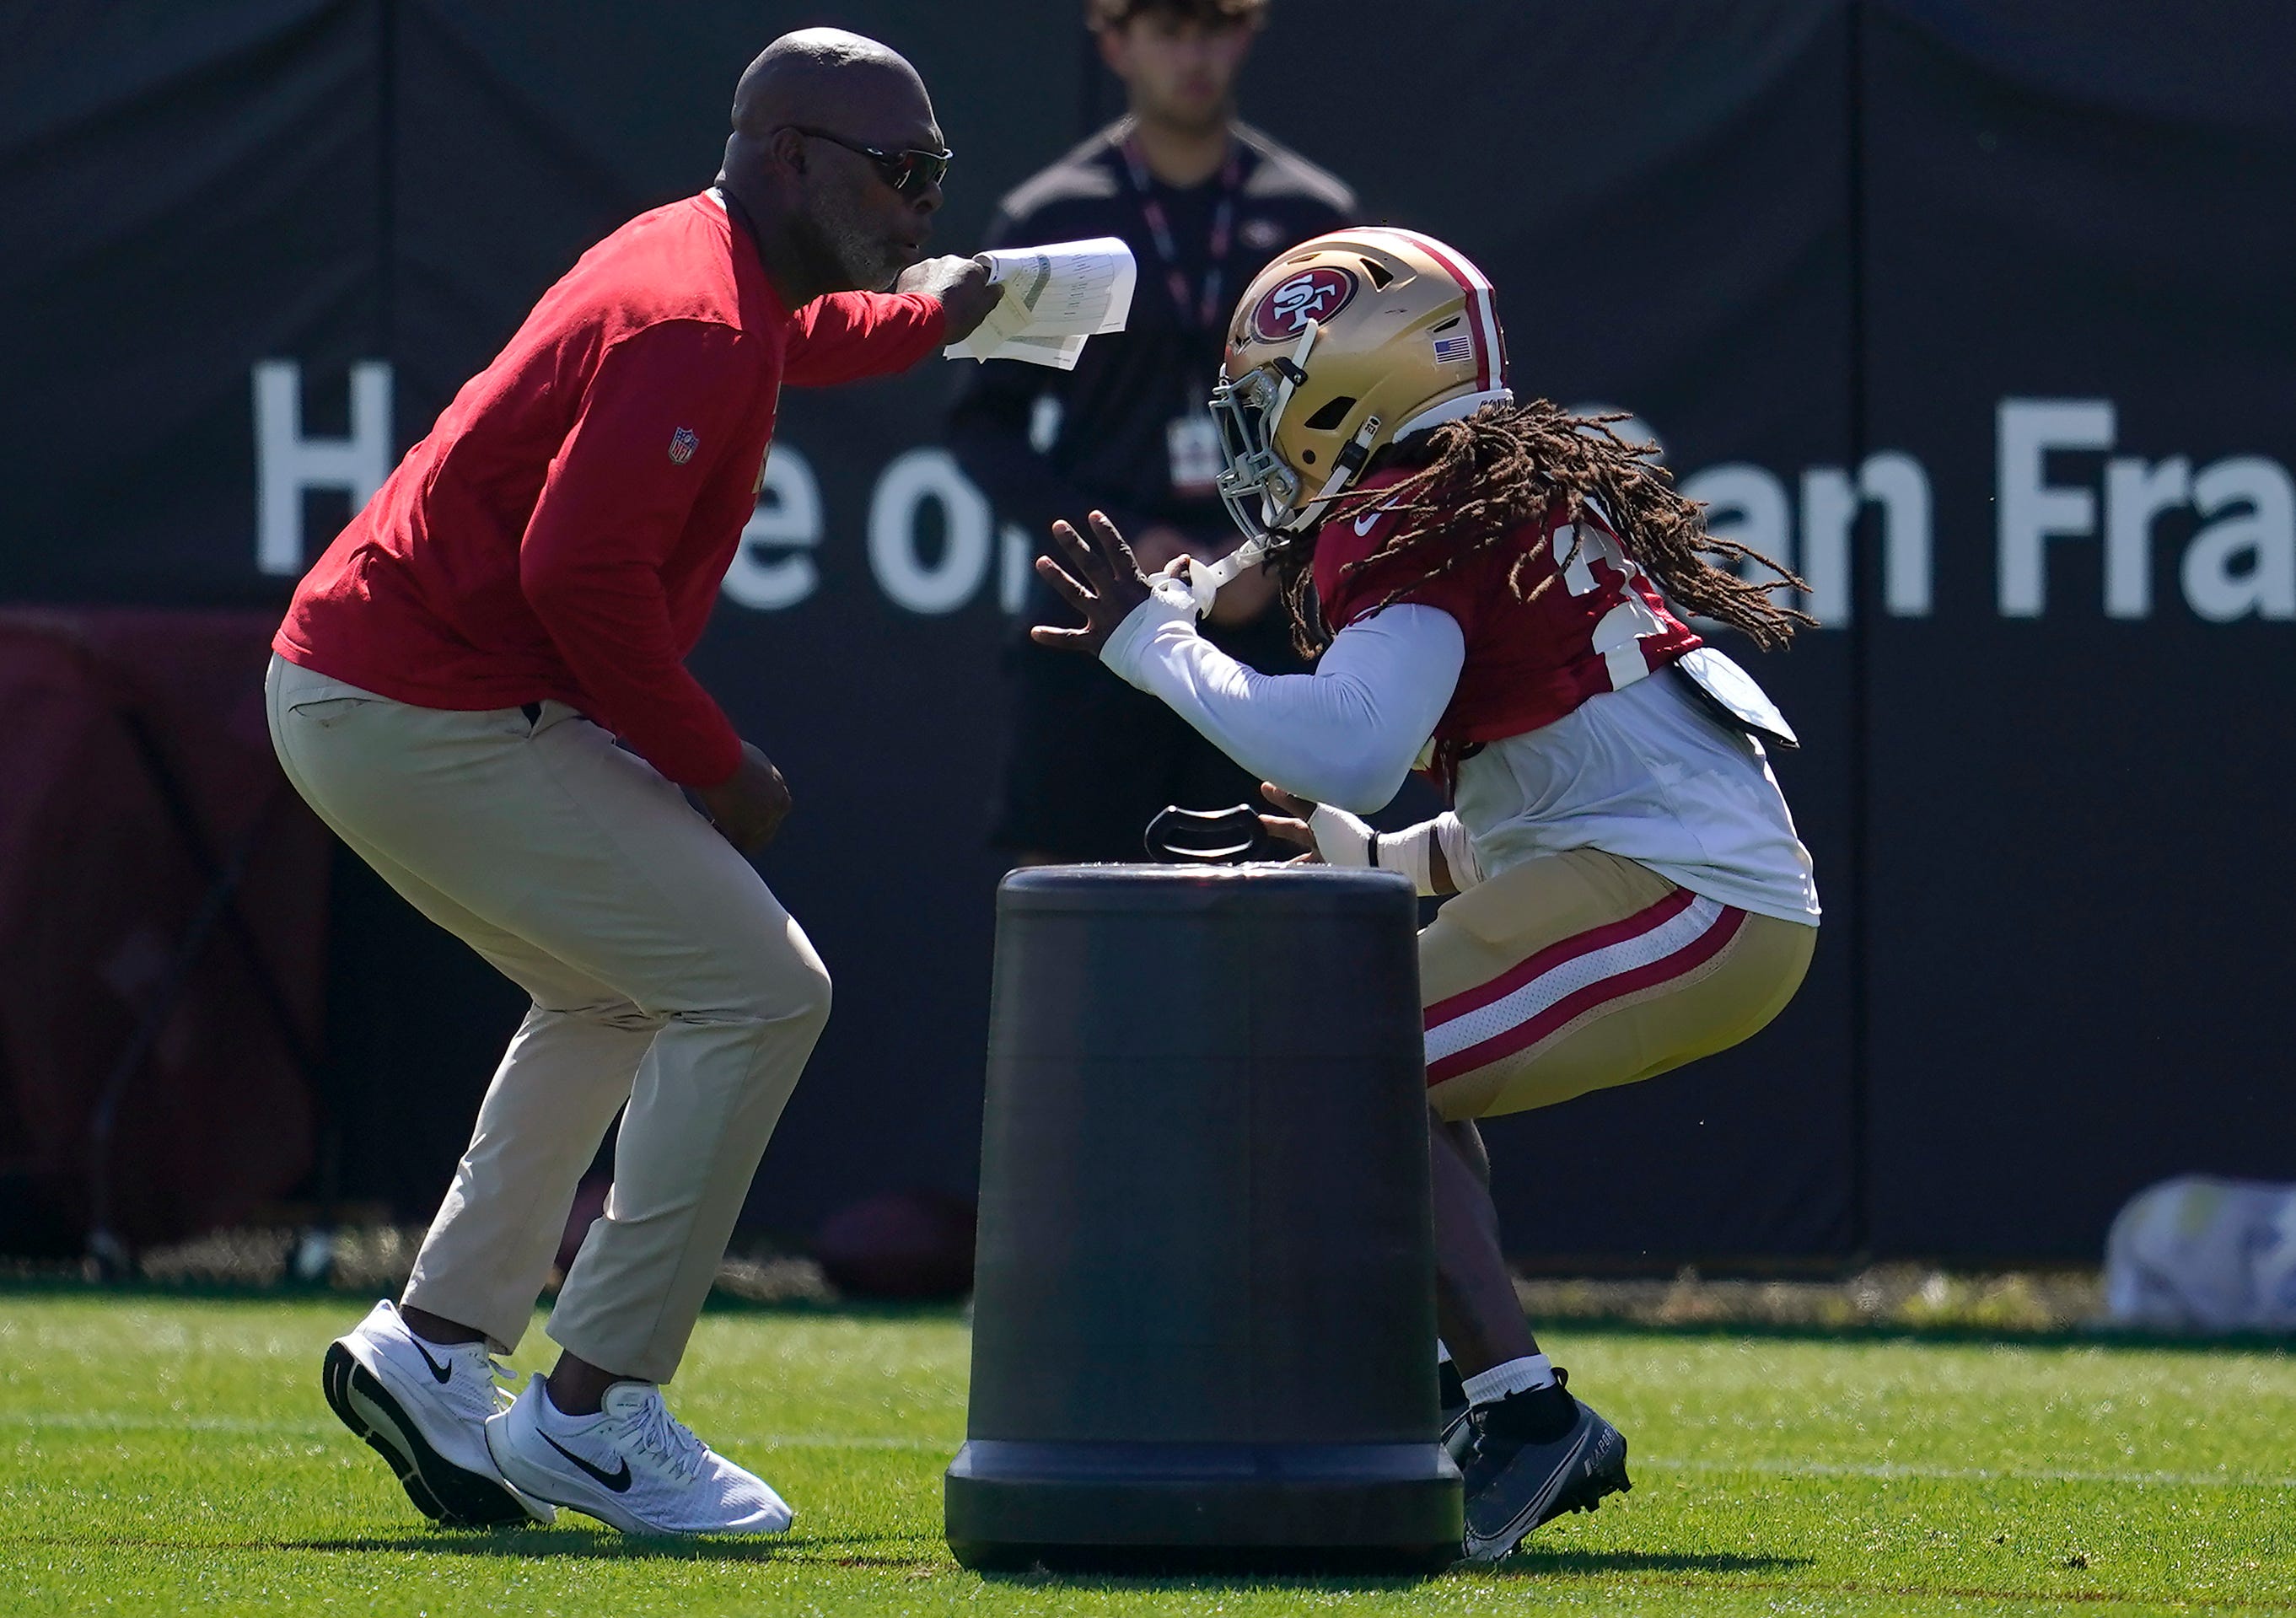 Anthony Lynn is an assistant head coach/running backs with the 49ers. He was the head coach of the Los Angeles Chargers for four seasons.